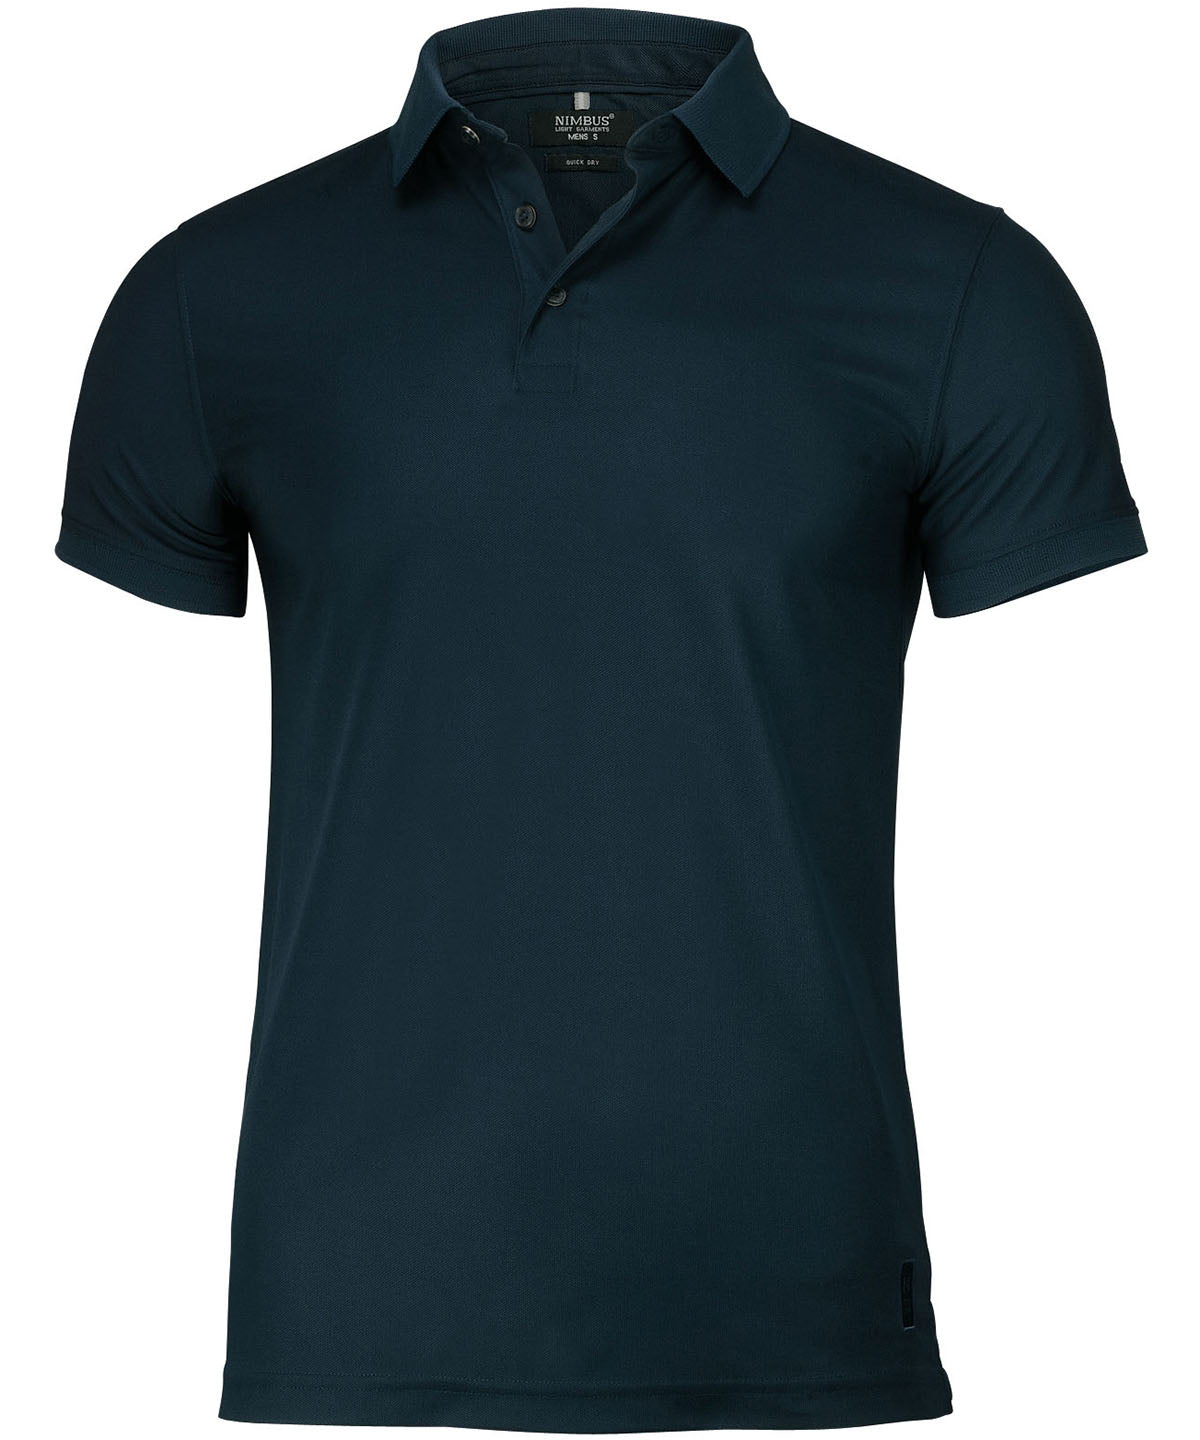 Personalised Polo Shirts - Black Nimbus Clearwater – quick-dry performance polo